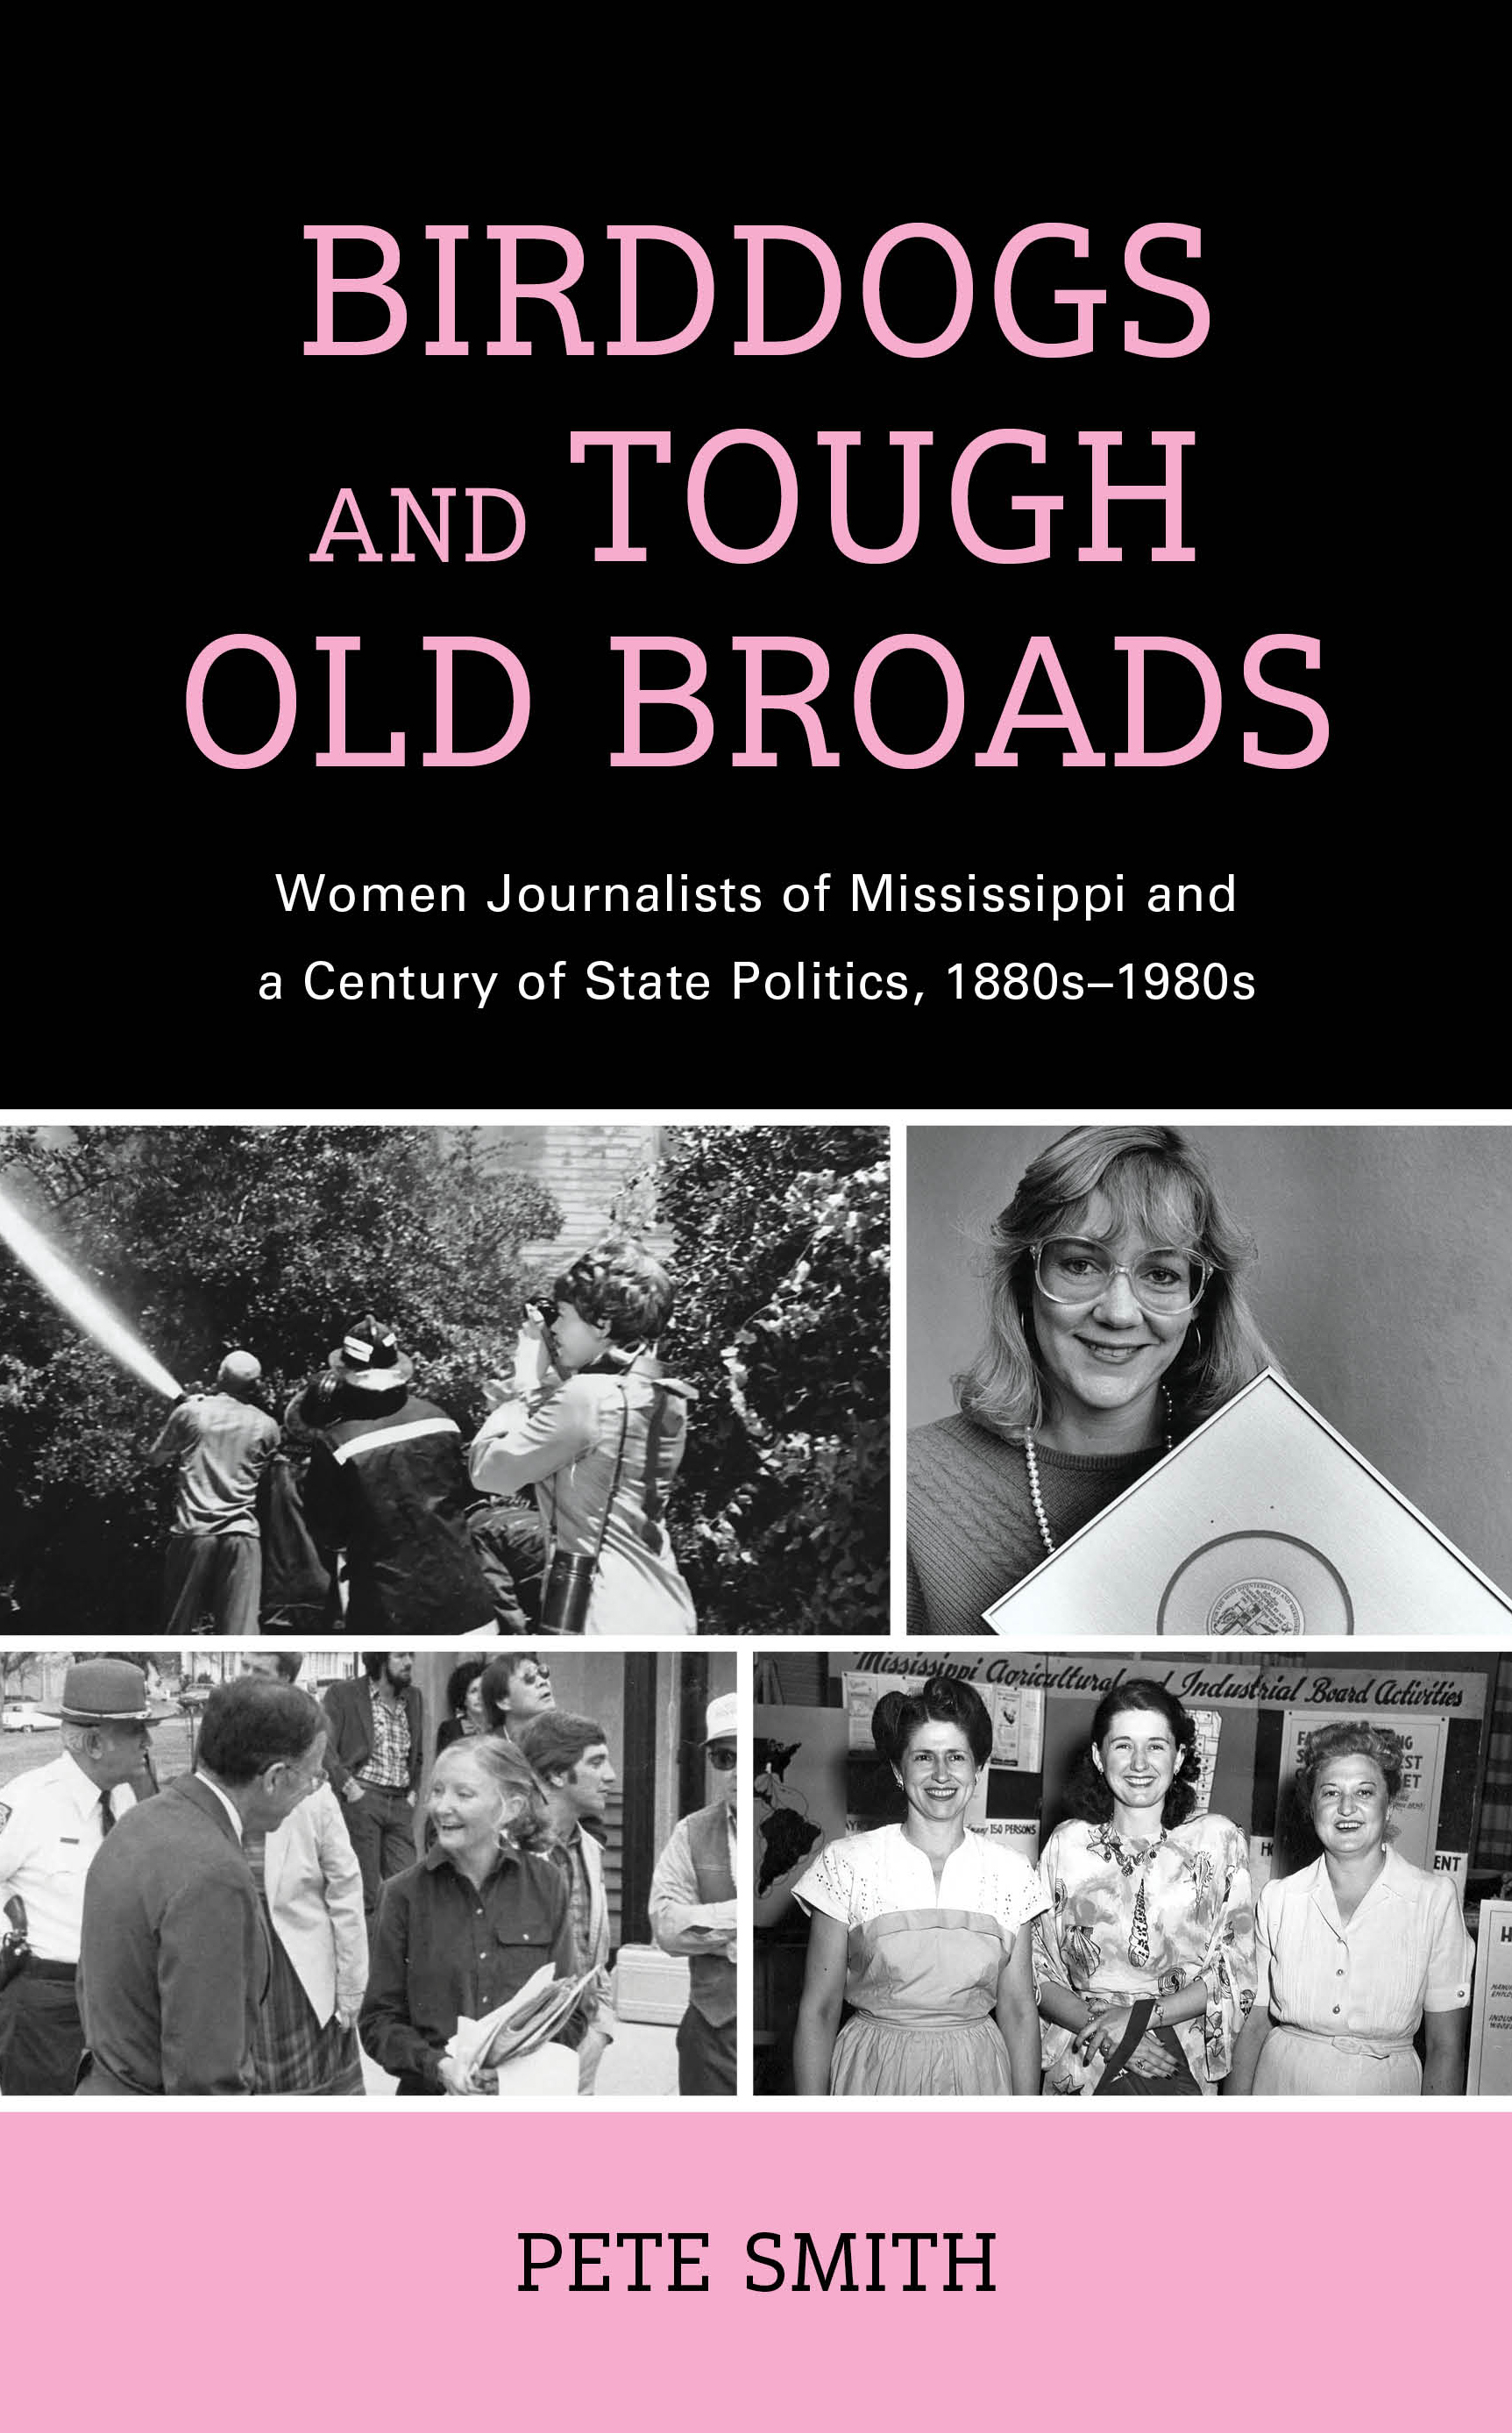 Birddogs and Tough Old Broads: Women Journalists of Mississippi and a Century of State Politics, 1880s-1980s